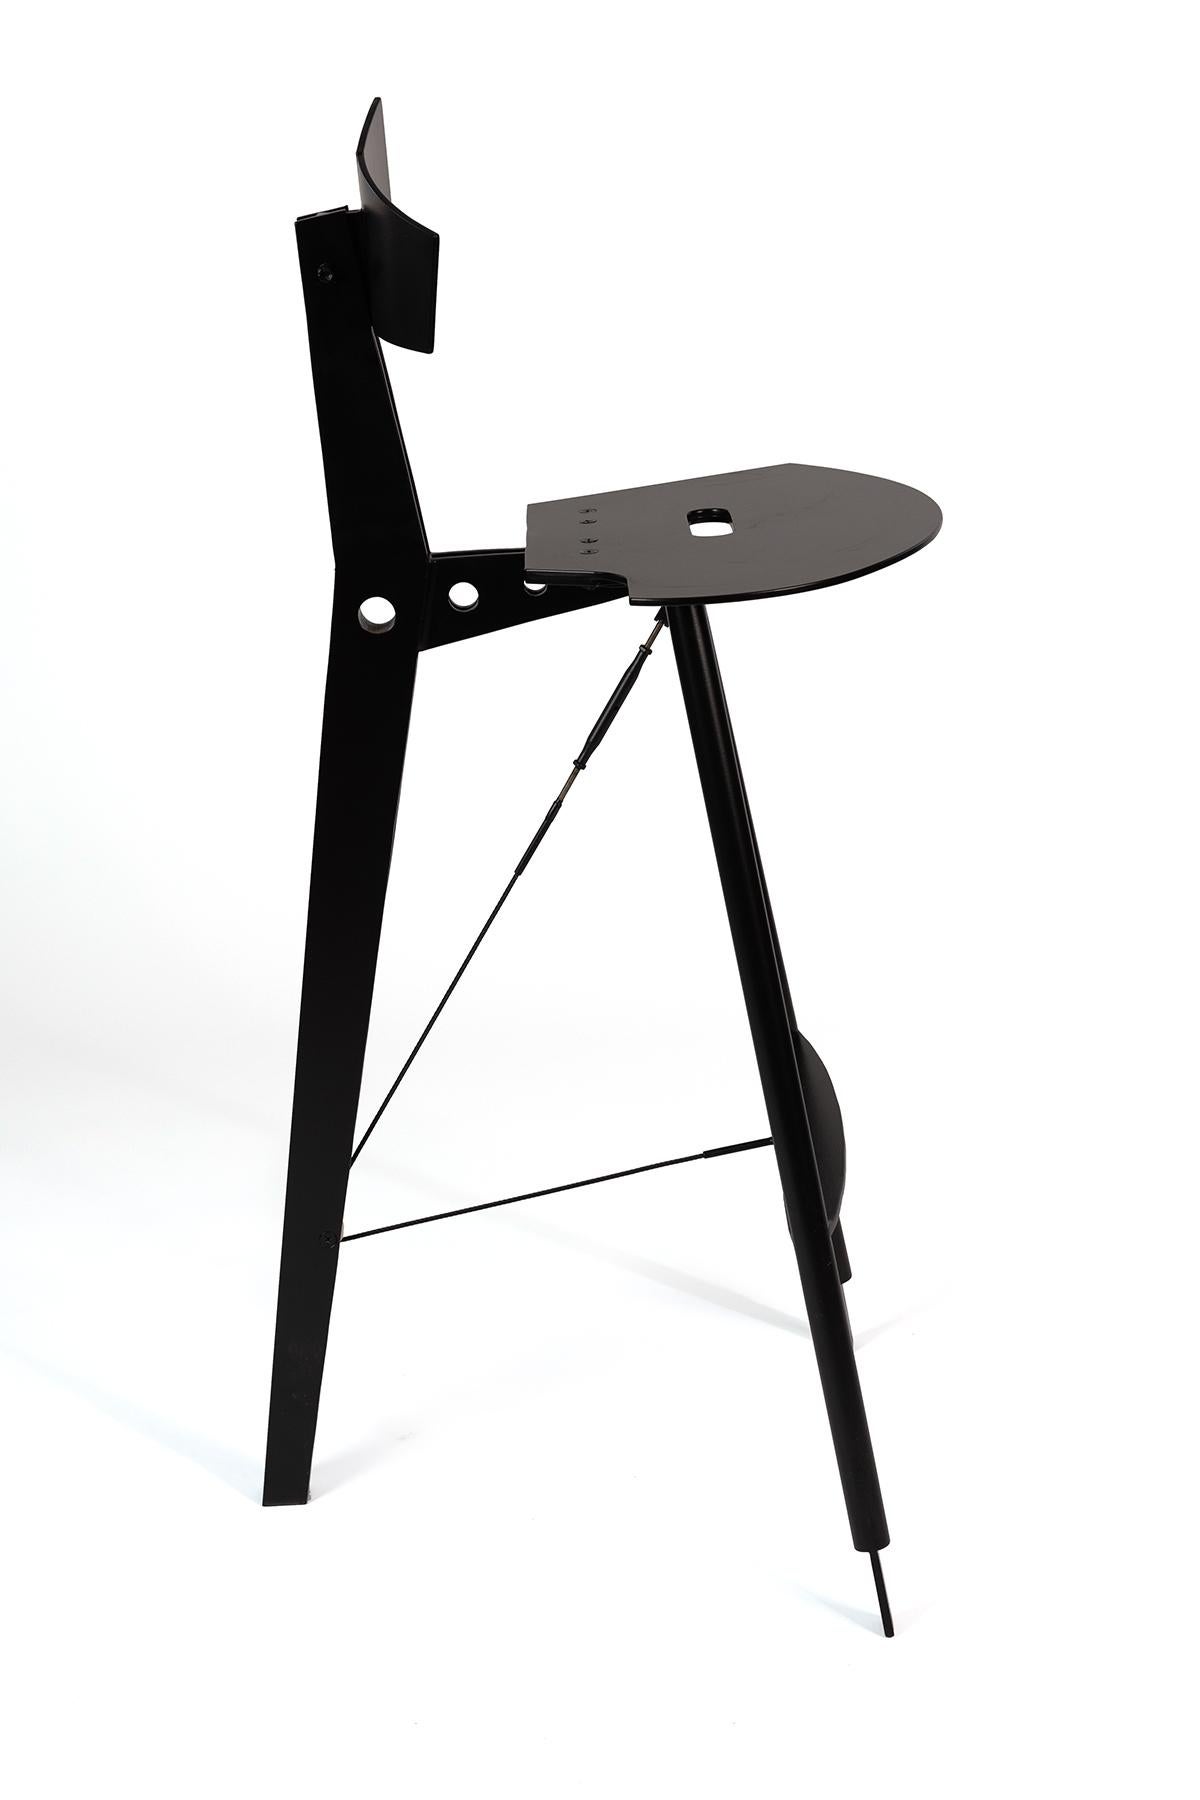 Robert Whitton one off aluminum drafting stool circa late 1980s. This architectural example has been newly powder coated in matte black.